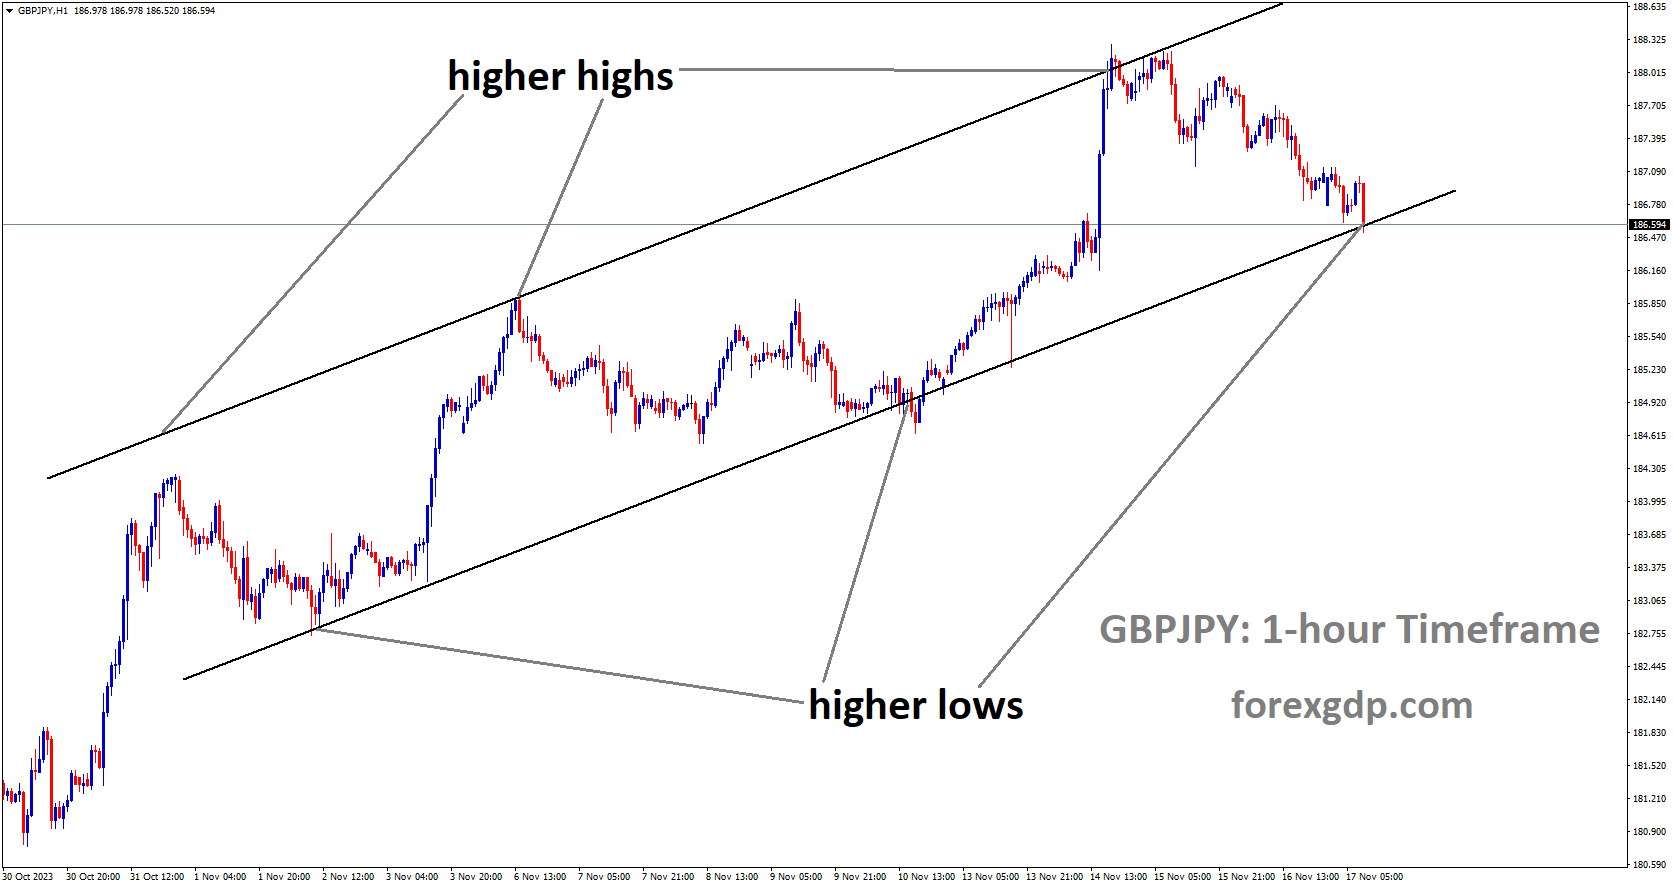 GBPJPY is moving in Ascending channel and market has reached higher low area of the channel